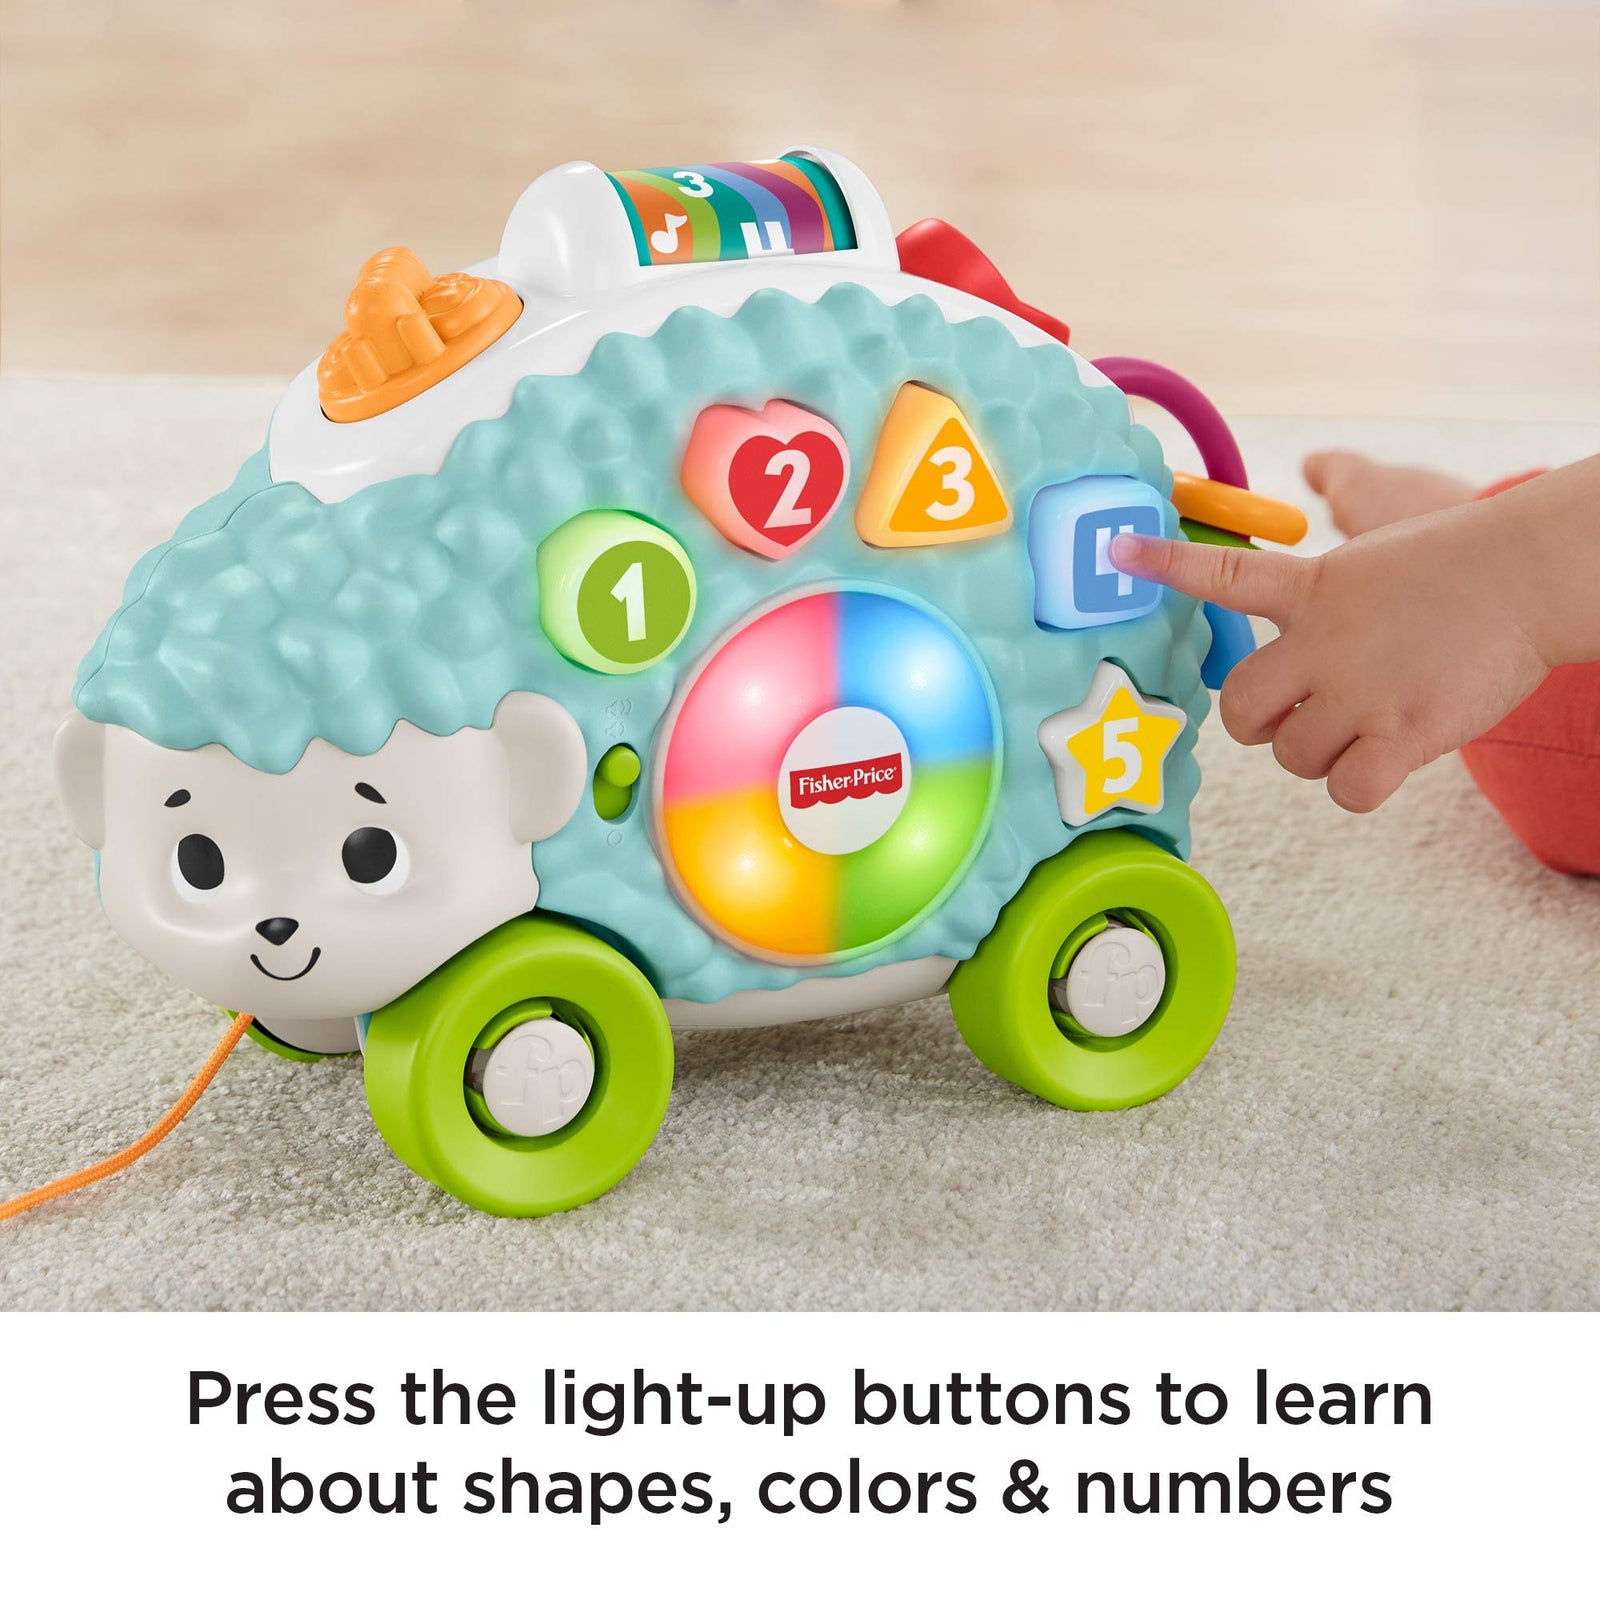 Fisher-Price Linkimals Happy Shapes Hedgehog - Interactive Educational Toy with Music and Lights for Baby Ages 9 Months & Up, Multi Color